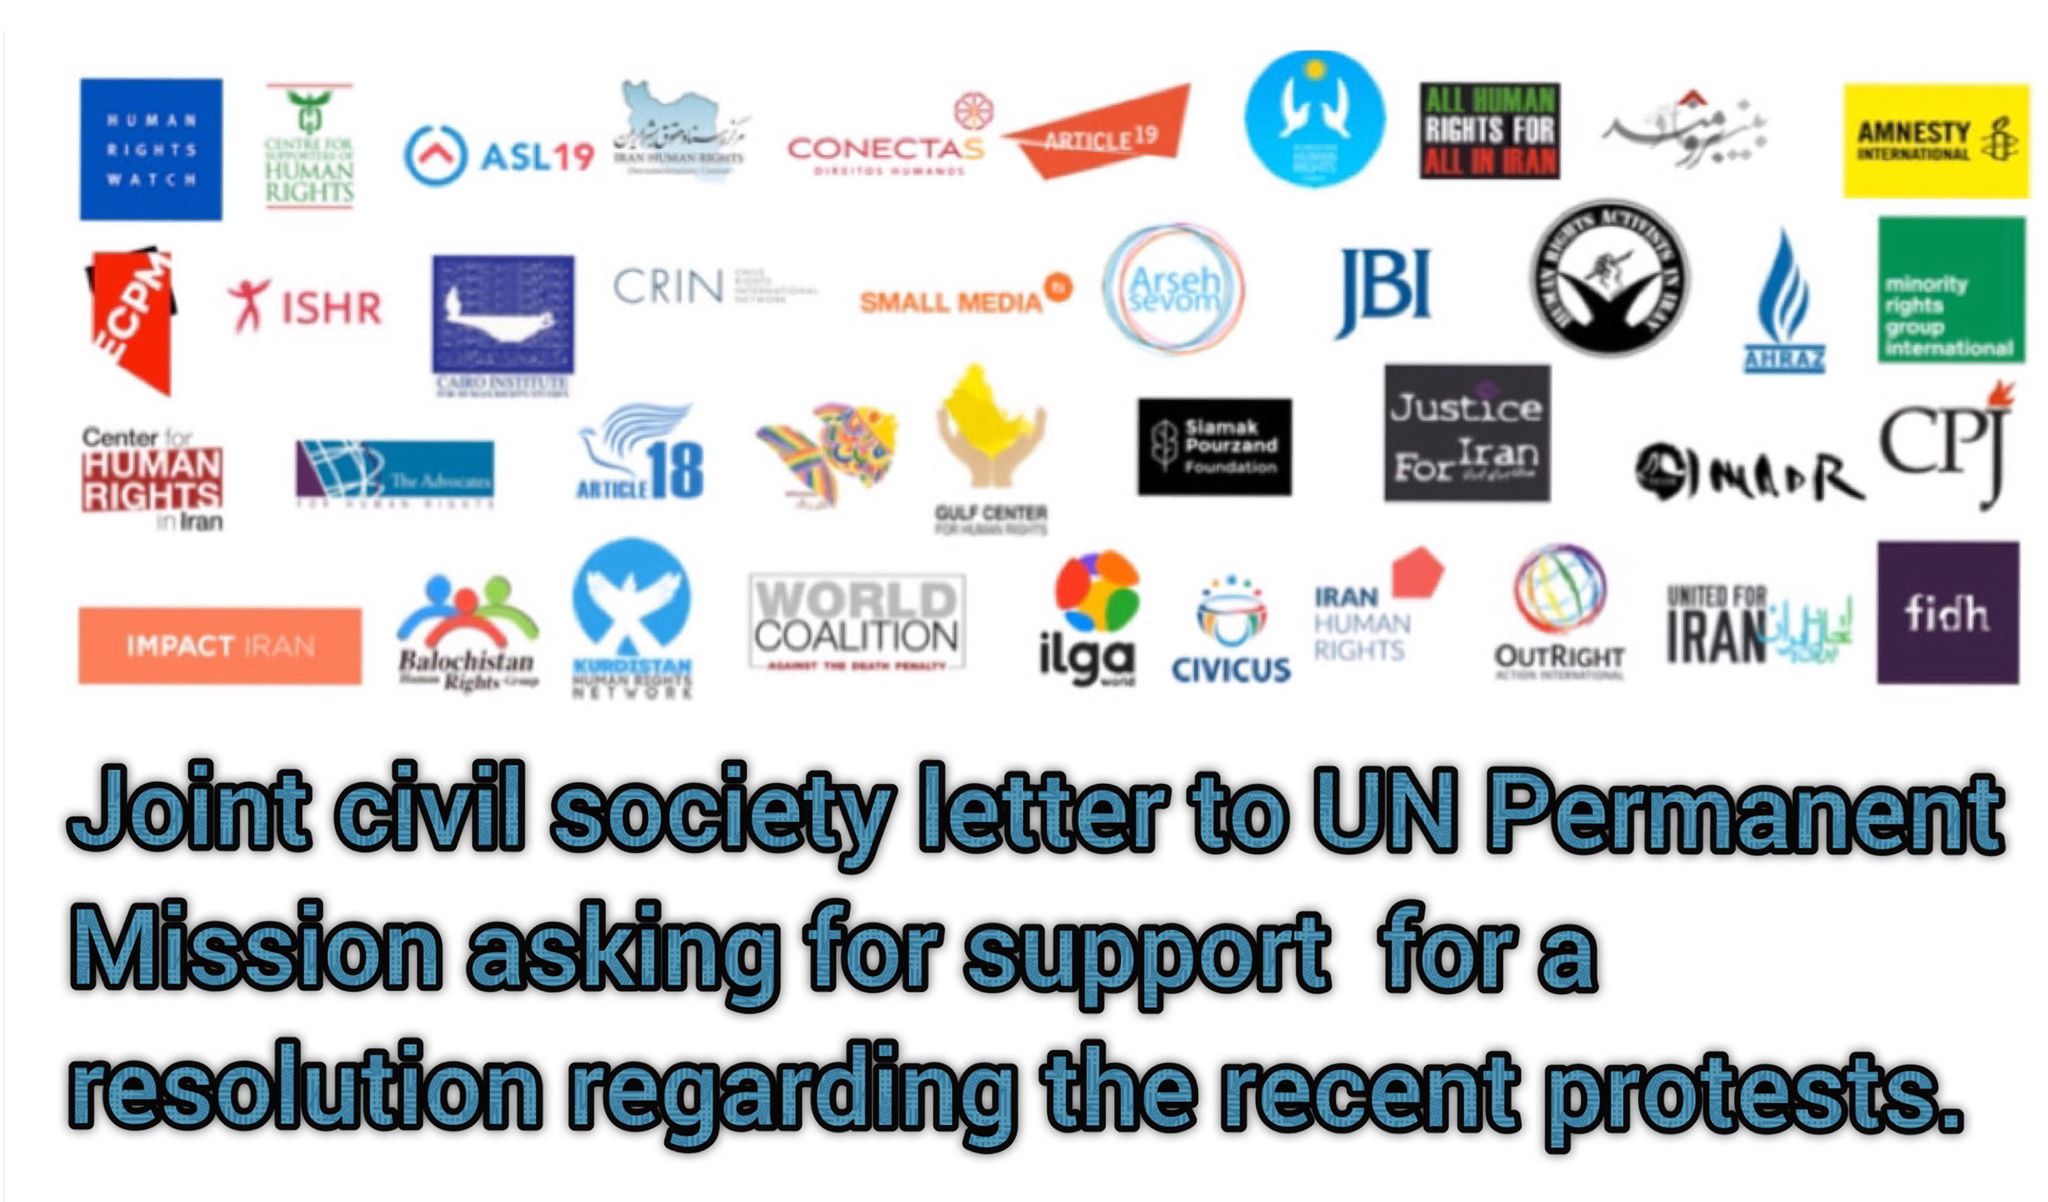 Joint civil society  letter to UN Permanent Mission asking for support  for a resolution regarding the recent protests.